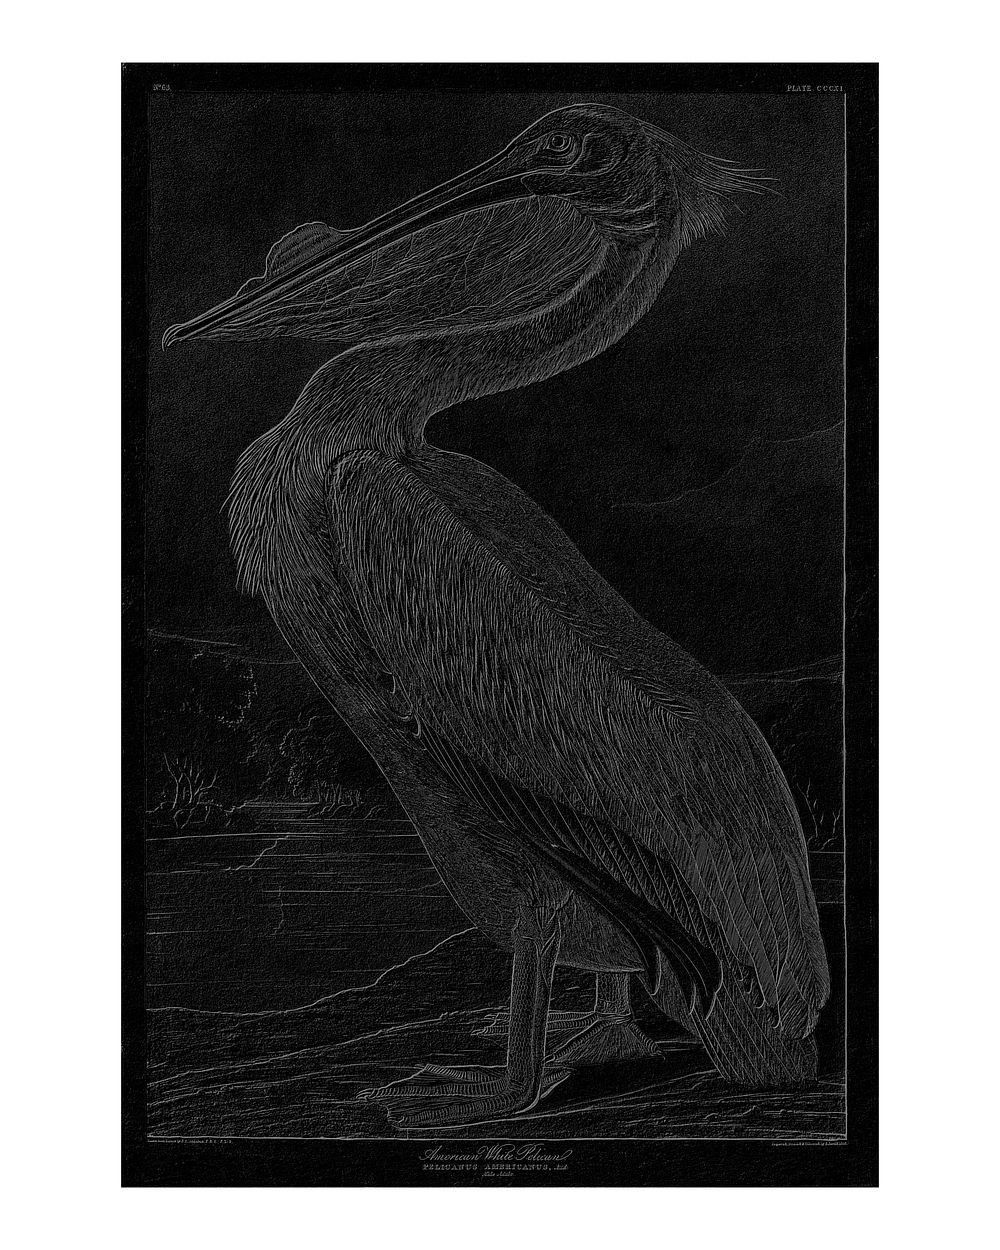 American white pelican vintage illustration wall art print and poster design remix from original arwork.